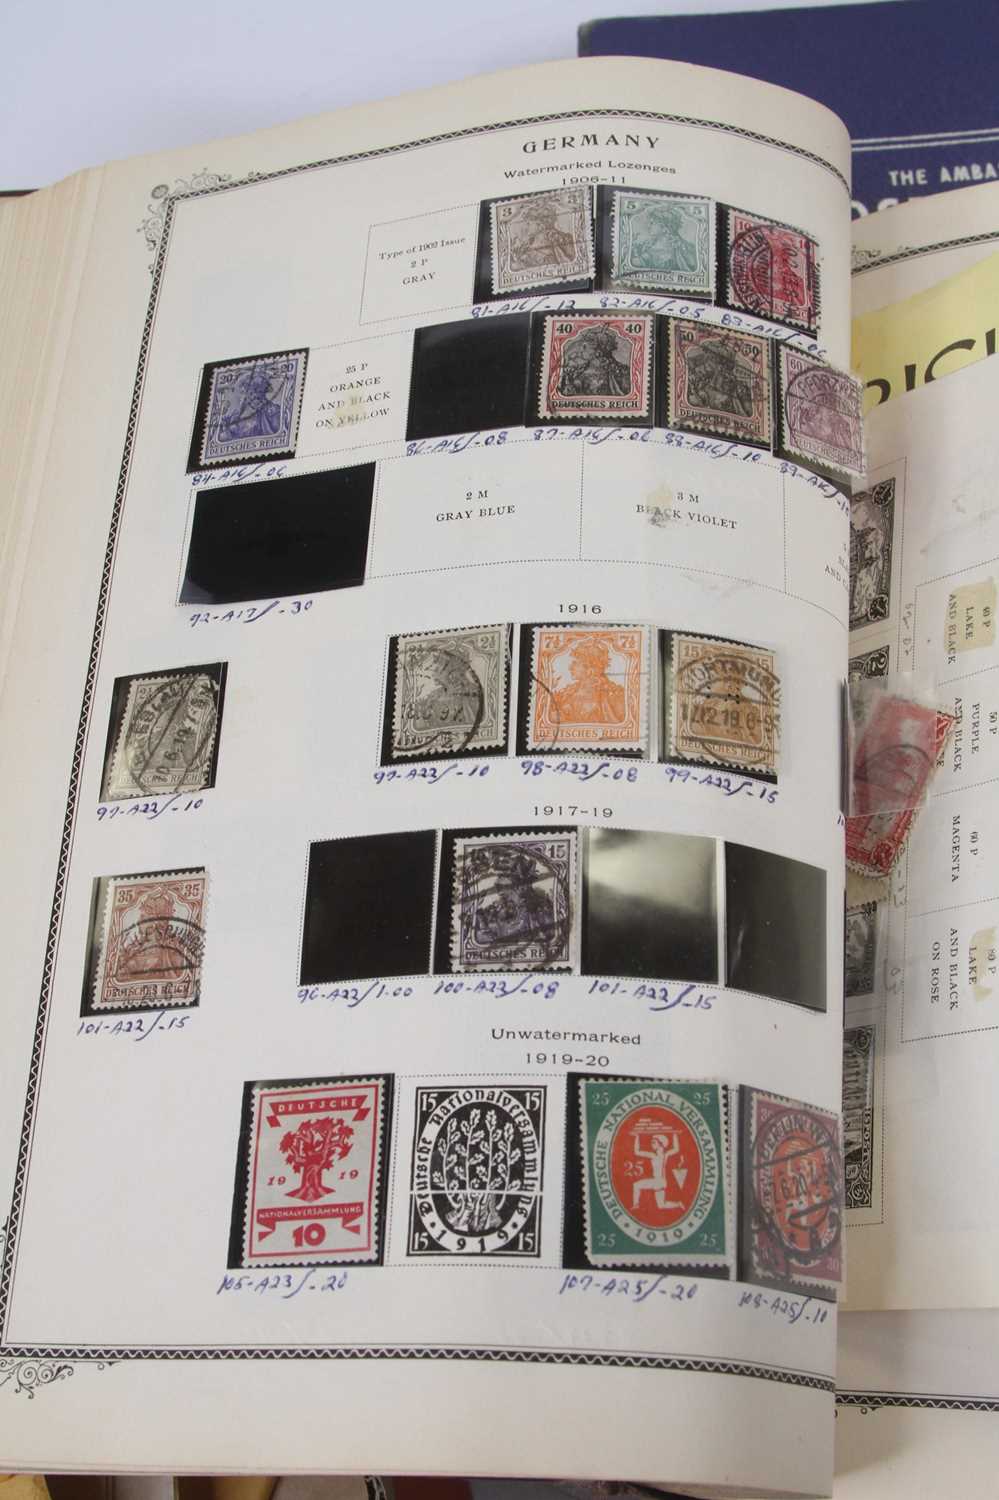 A collection of world stamps, to include examples from The Netherlands, Canada, and Australia, in